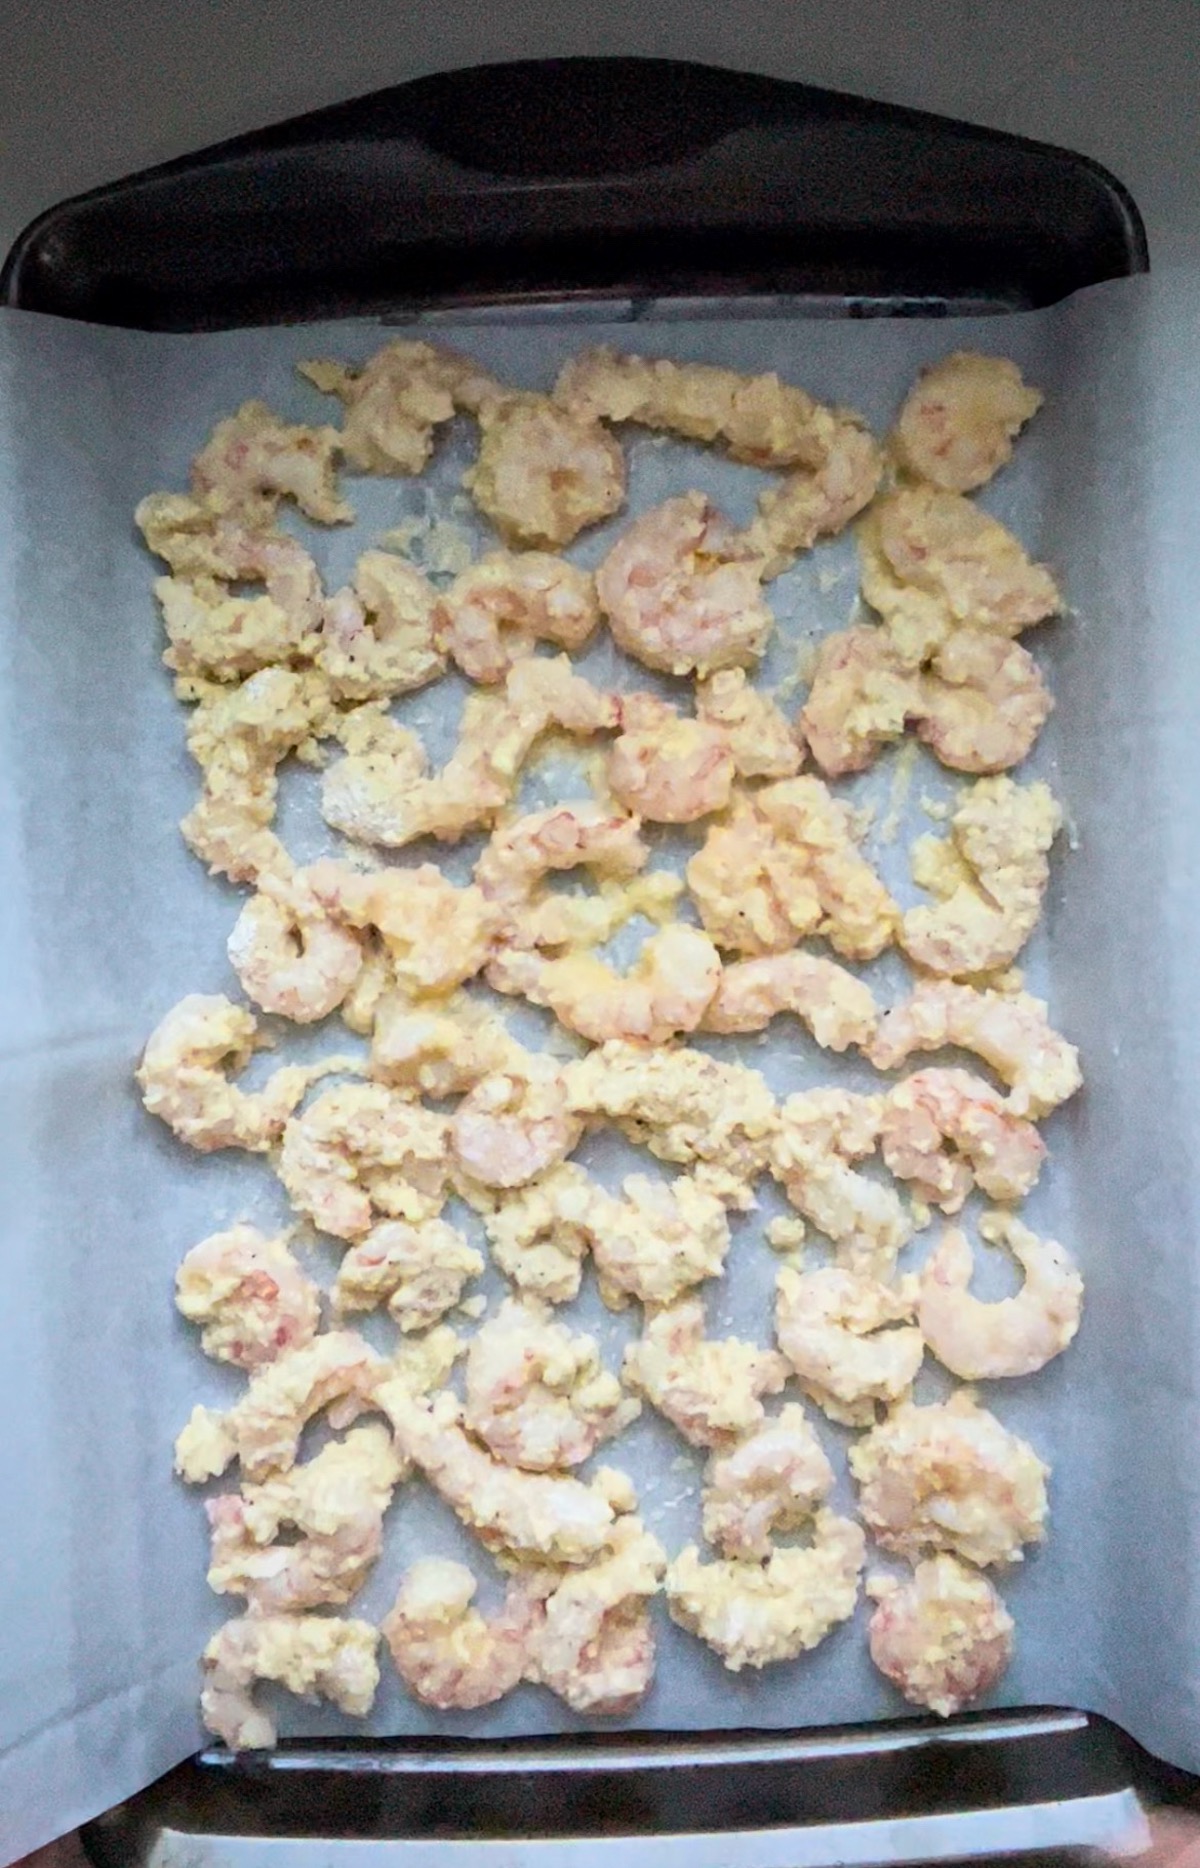 shrimp in a single layer on a baking sheet